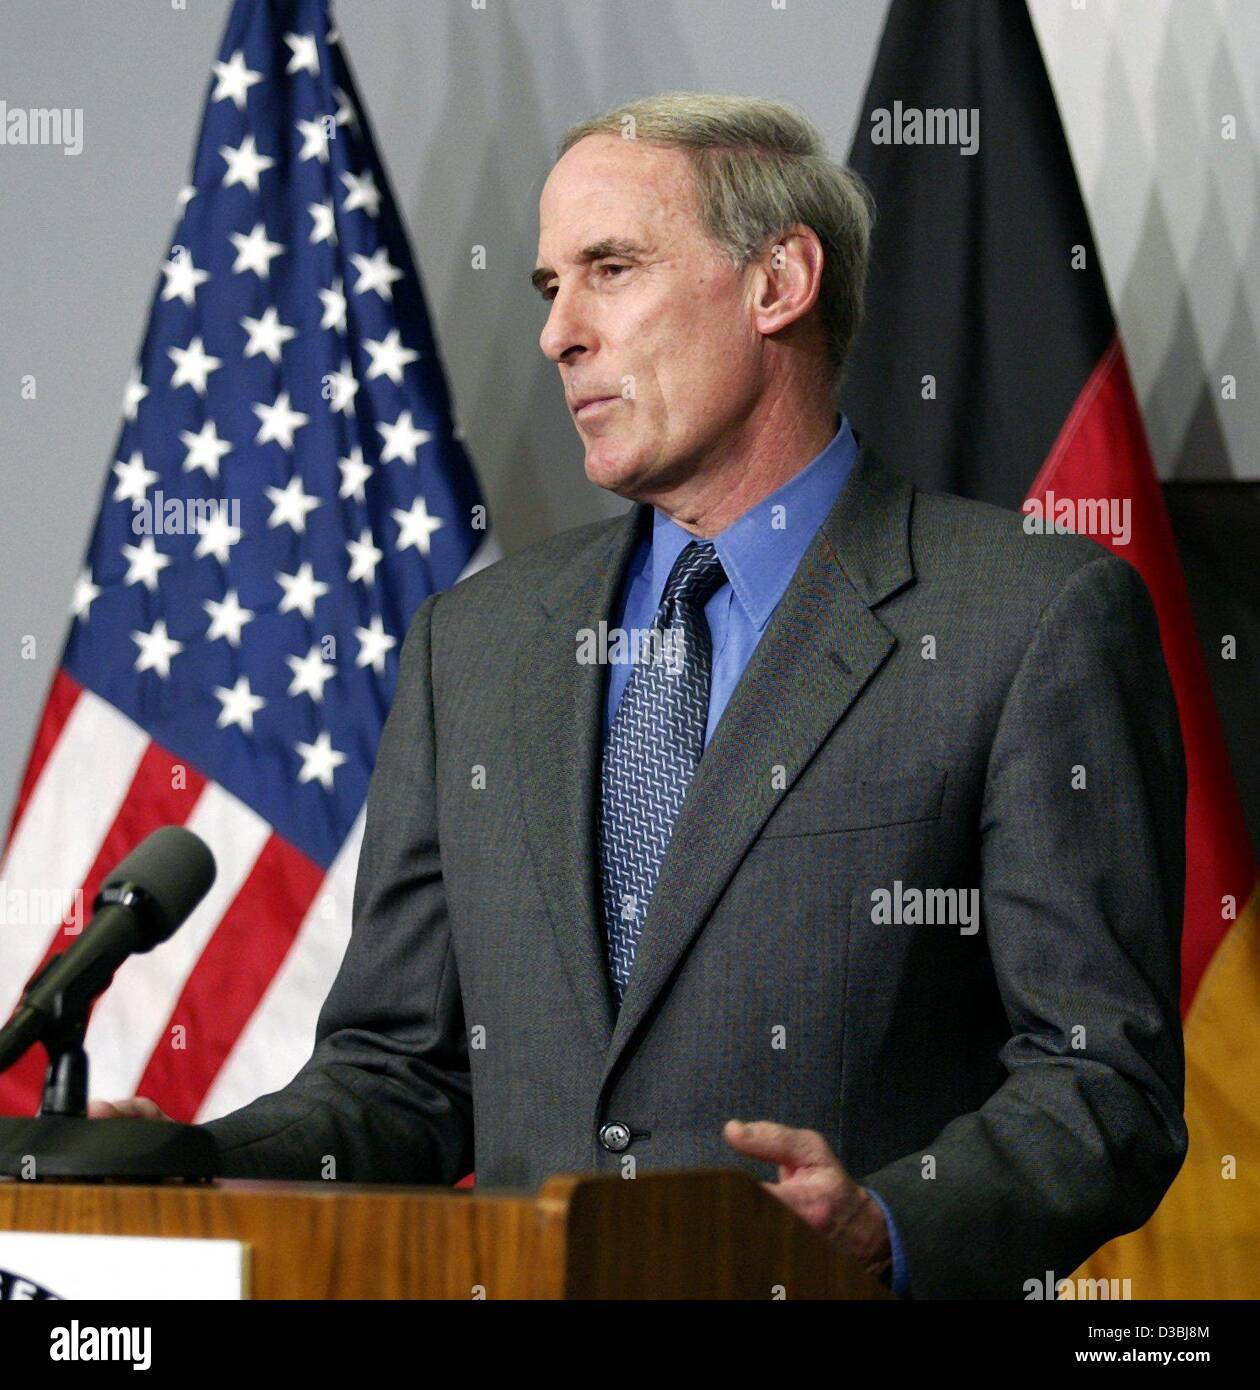 (dpa) - Daniel R. Coats, US Ambassador to Germany, is speaking at a press conference at the US military hospital in Landstuhl, Germany, 31 March 2003. He reported about his visit to wounded soldiers. Furthermore, Coats appreciated the German support for the US military. This also applies to other US Stock Photo